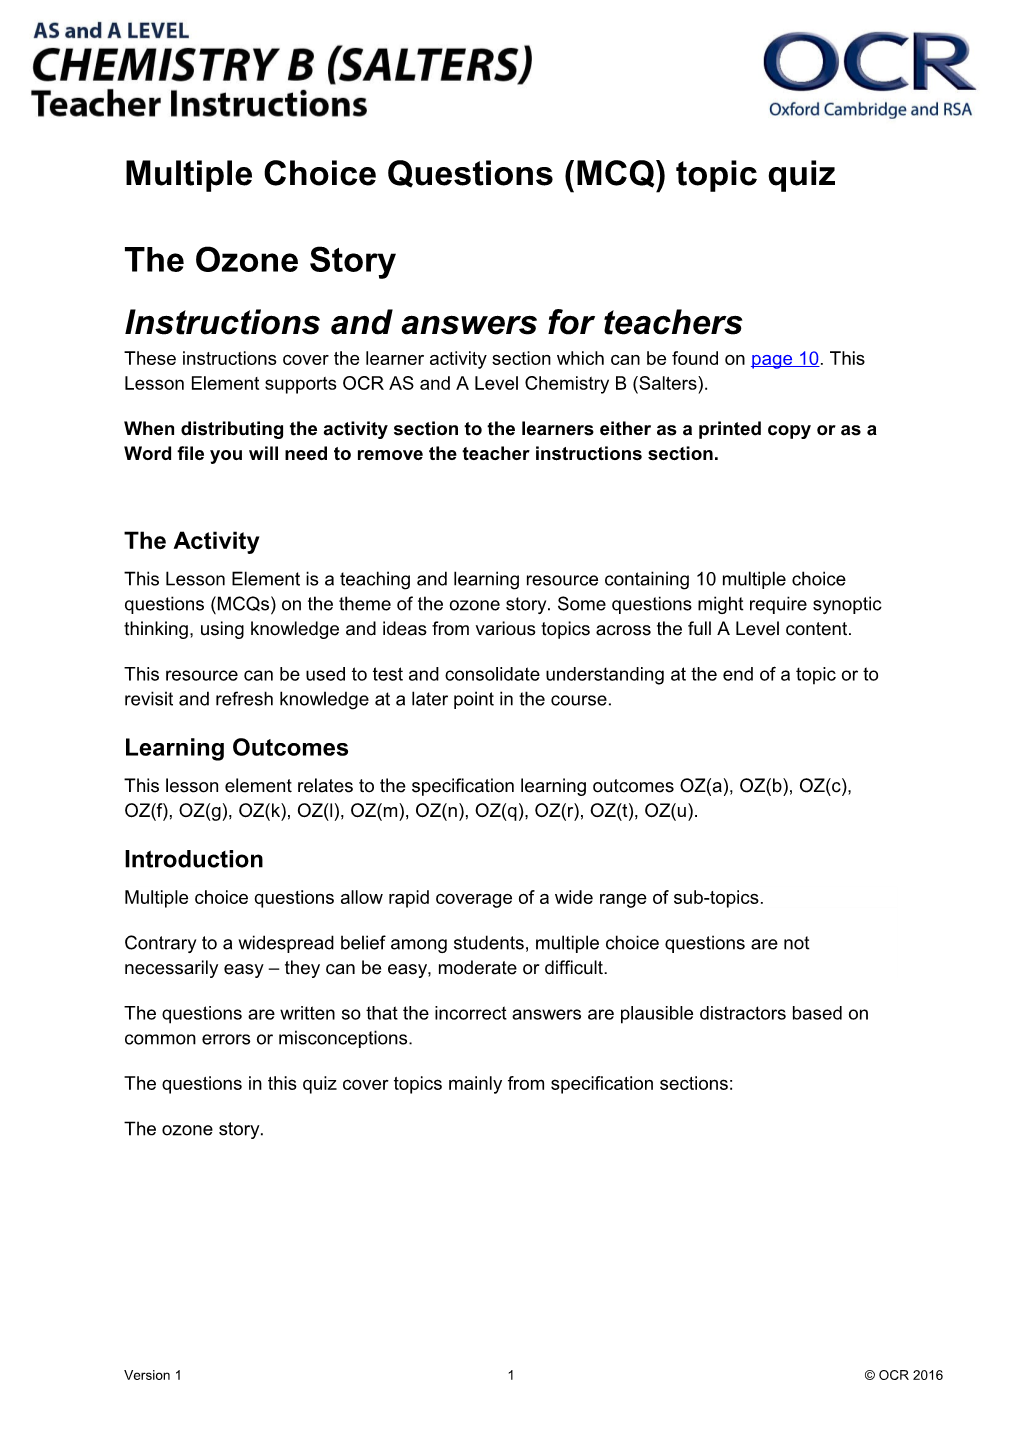 OCR AS and a Level Chemistry B Multiple Choice Questions Quiz (The Ozone Story)